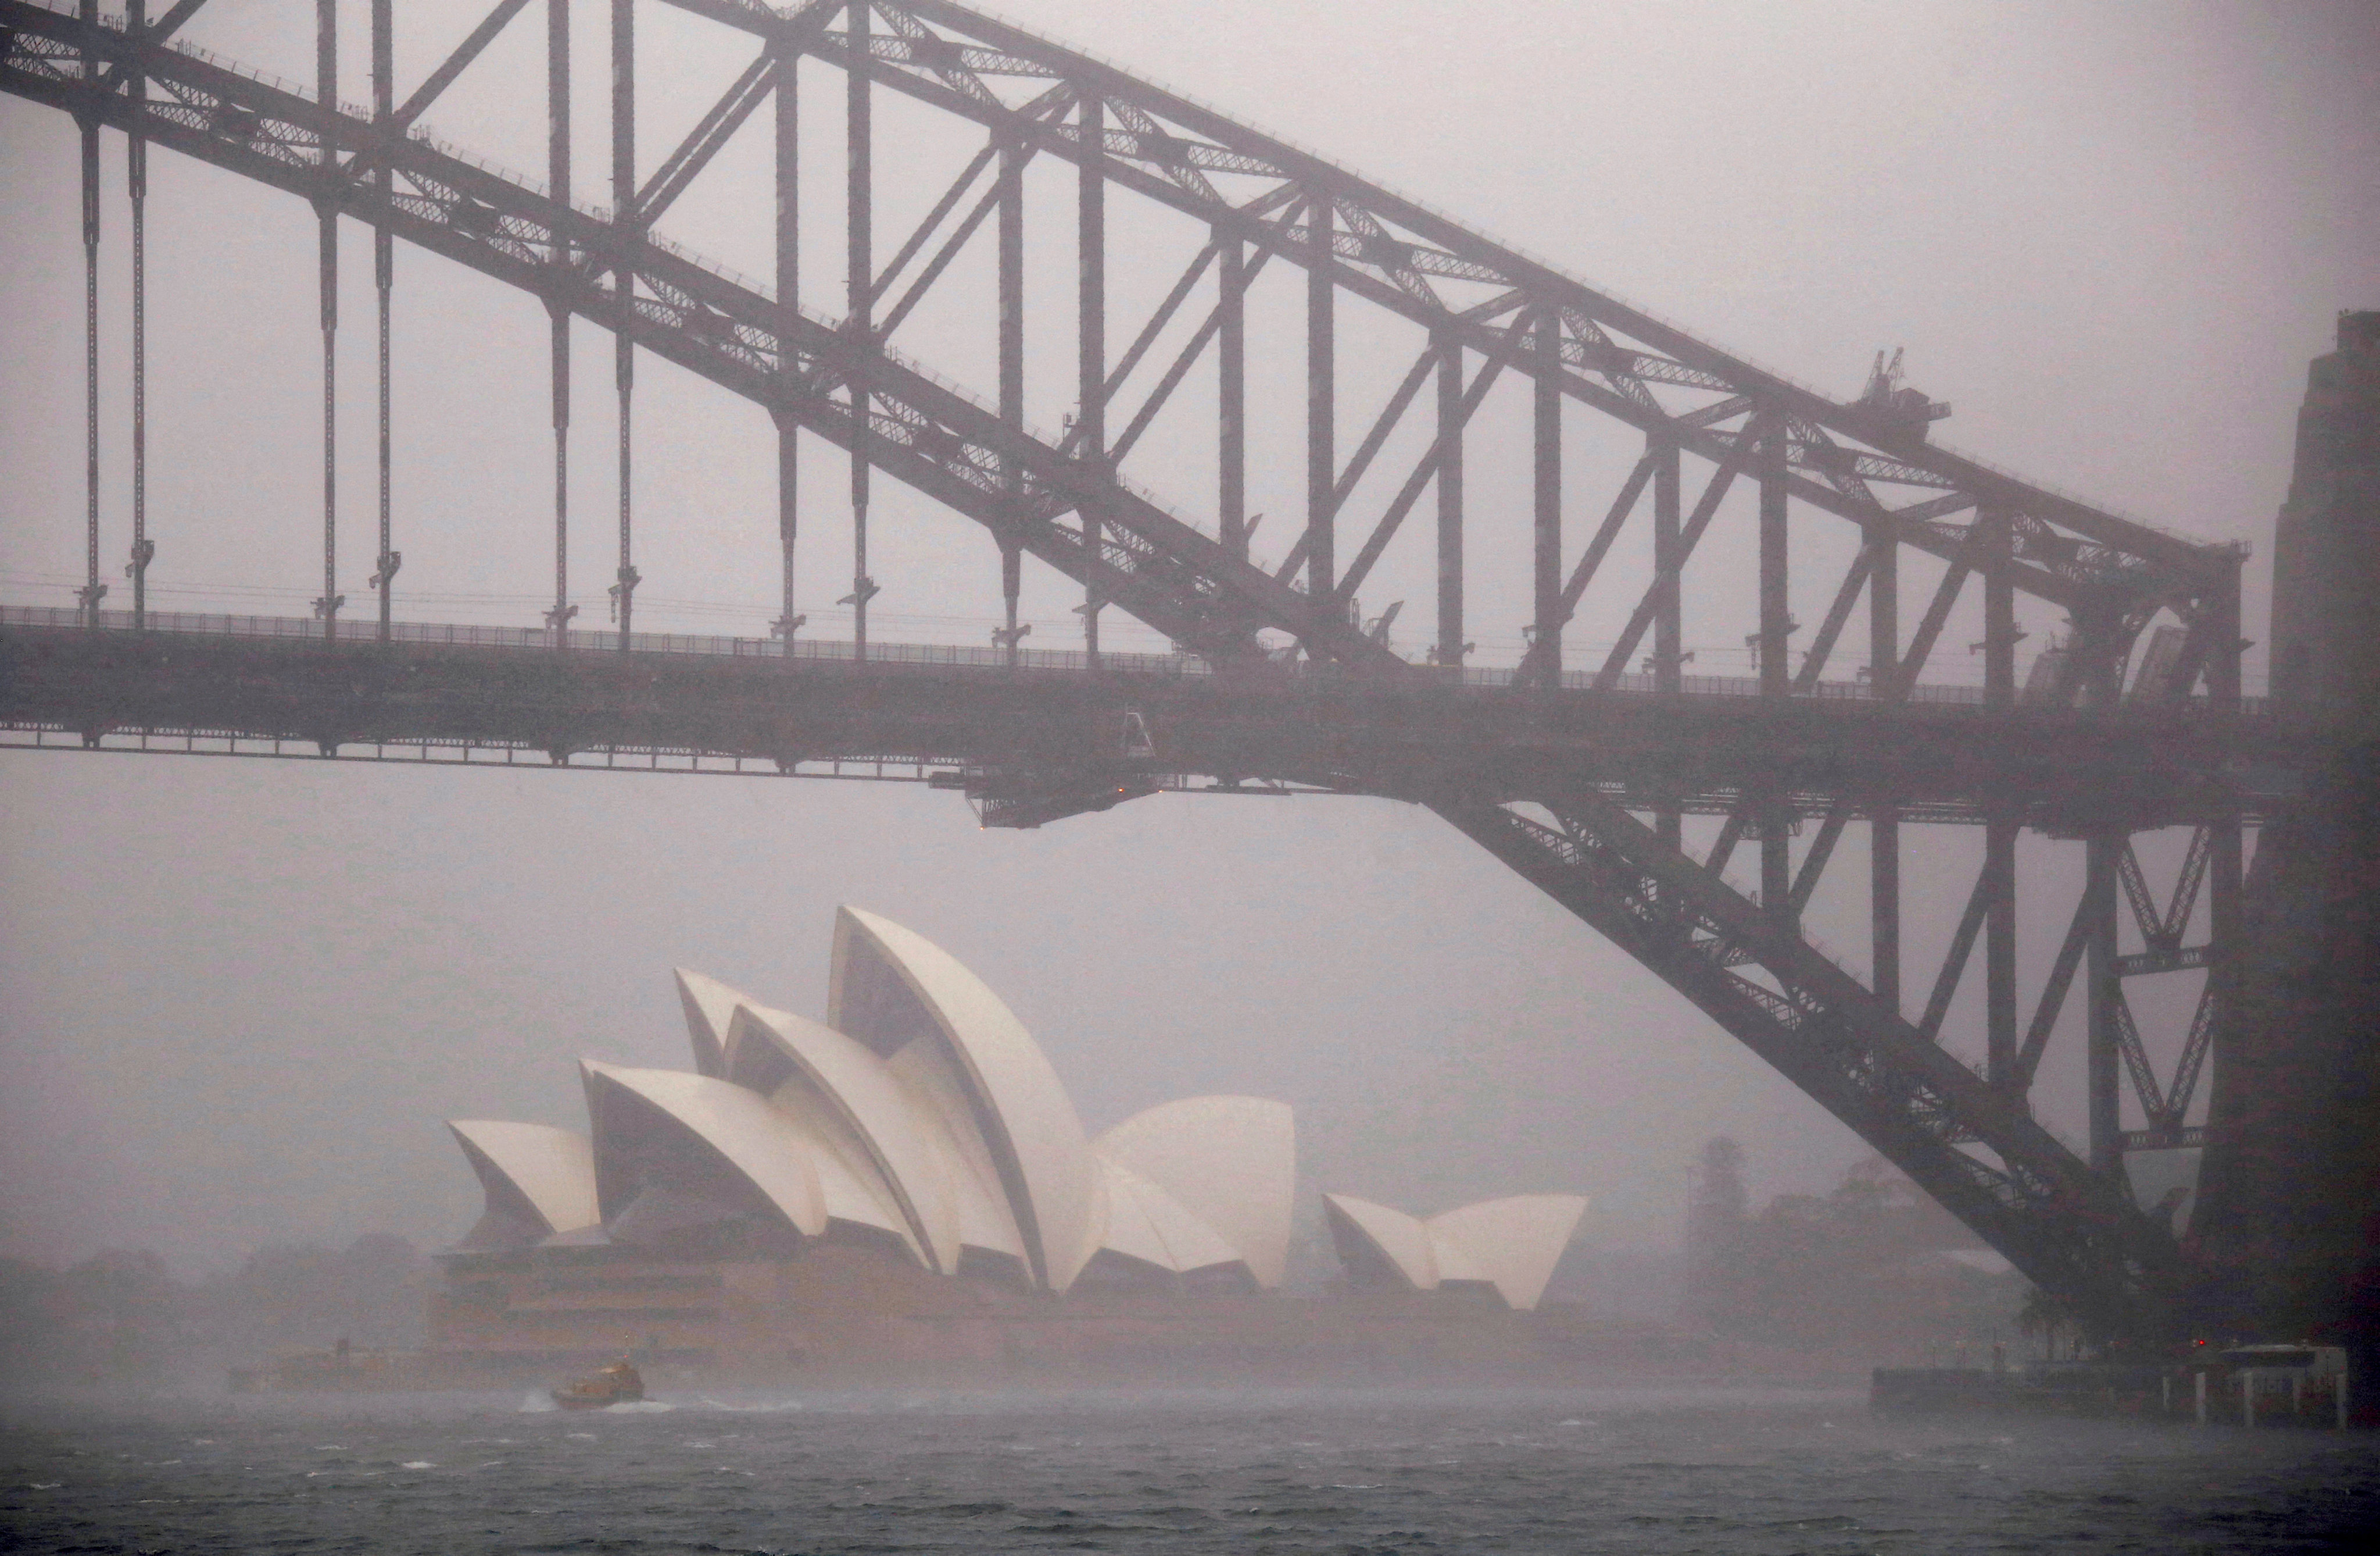 Sydney is set to record its wettest year in 164 years as authorities braced for major floods in Australia’s east, with more heavy downpours expected to fall over the next three days. Photo: Reuters/File